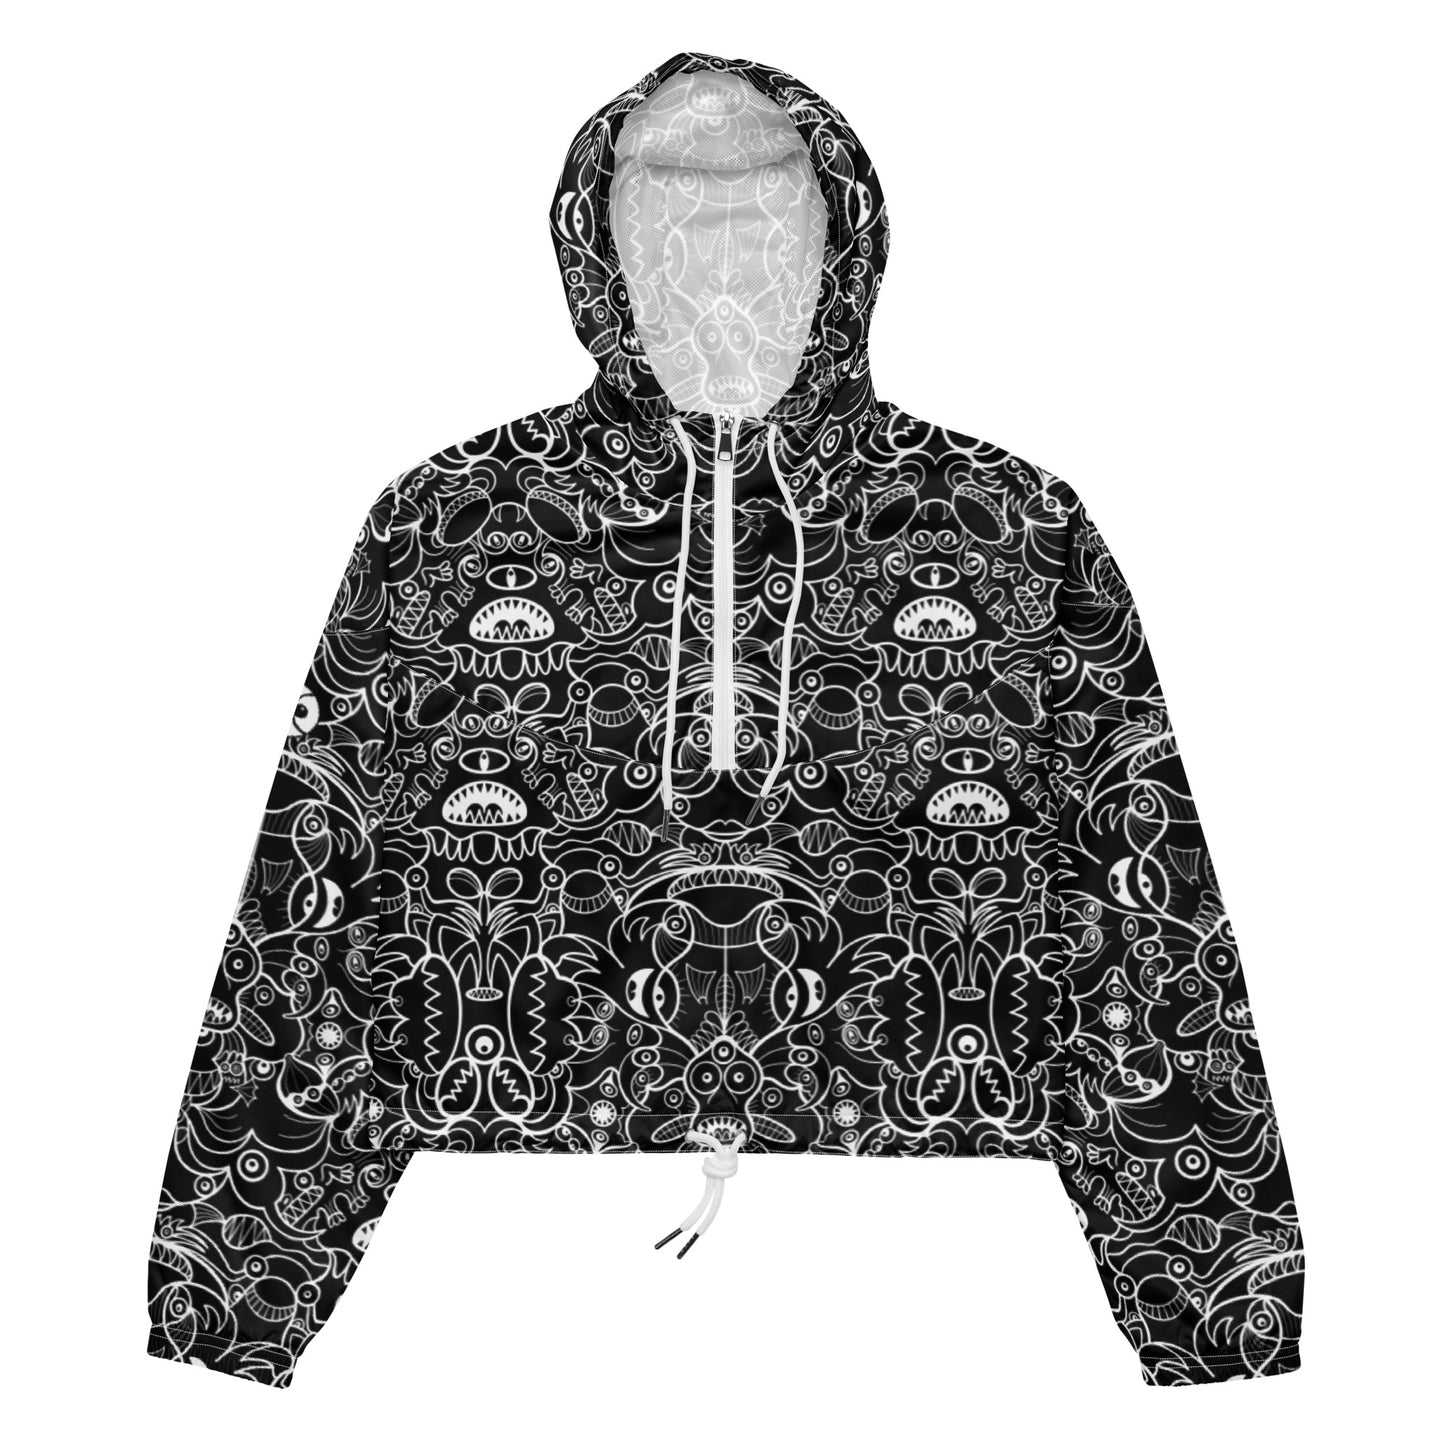 The powerful dark side of the Doodle world Women’s cropped windbreaker. Front view